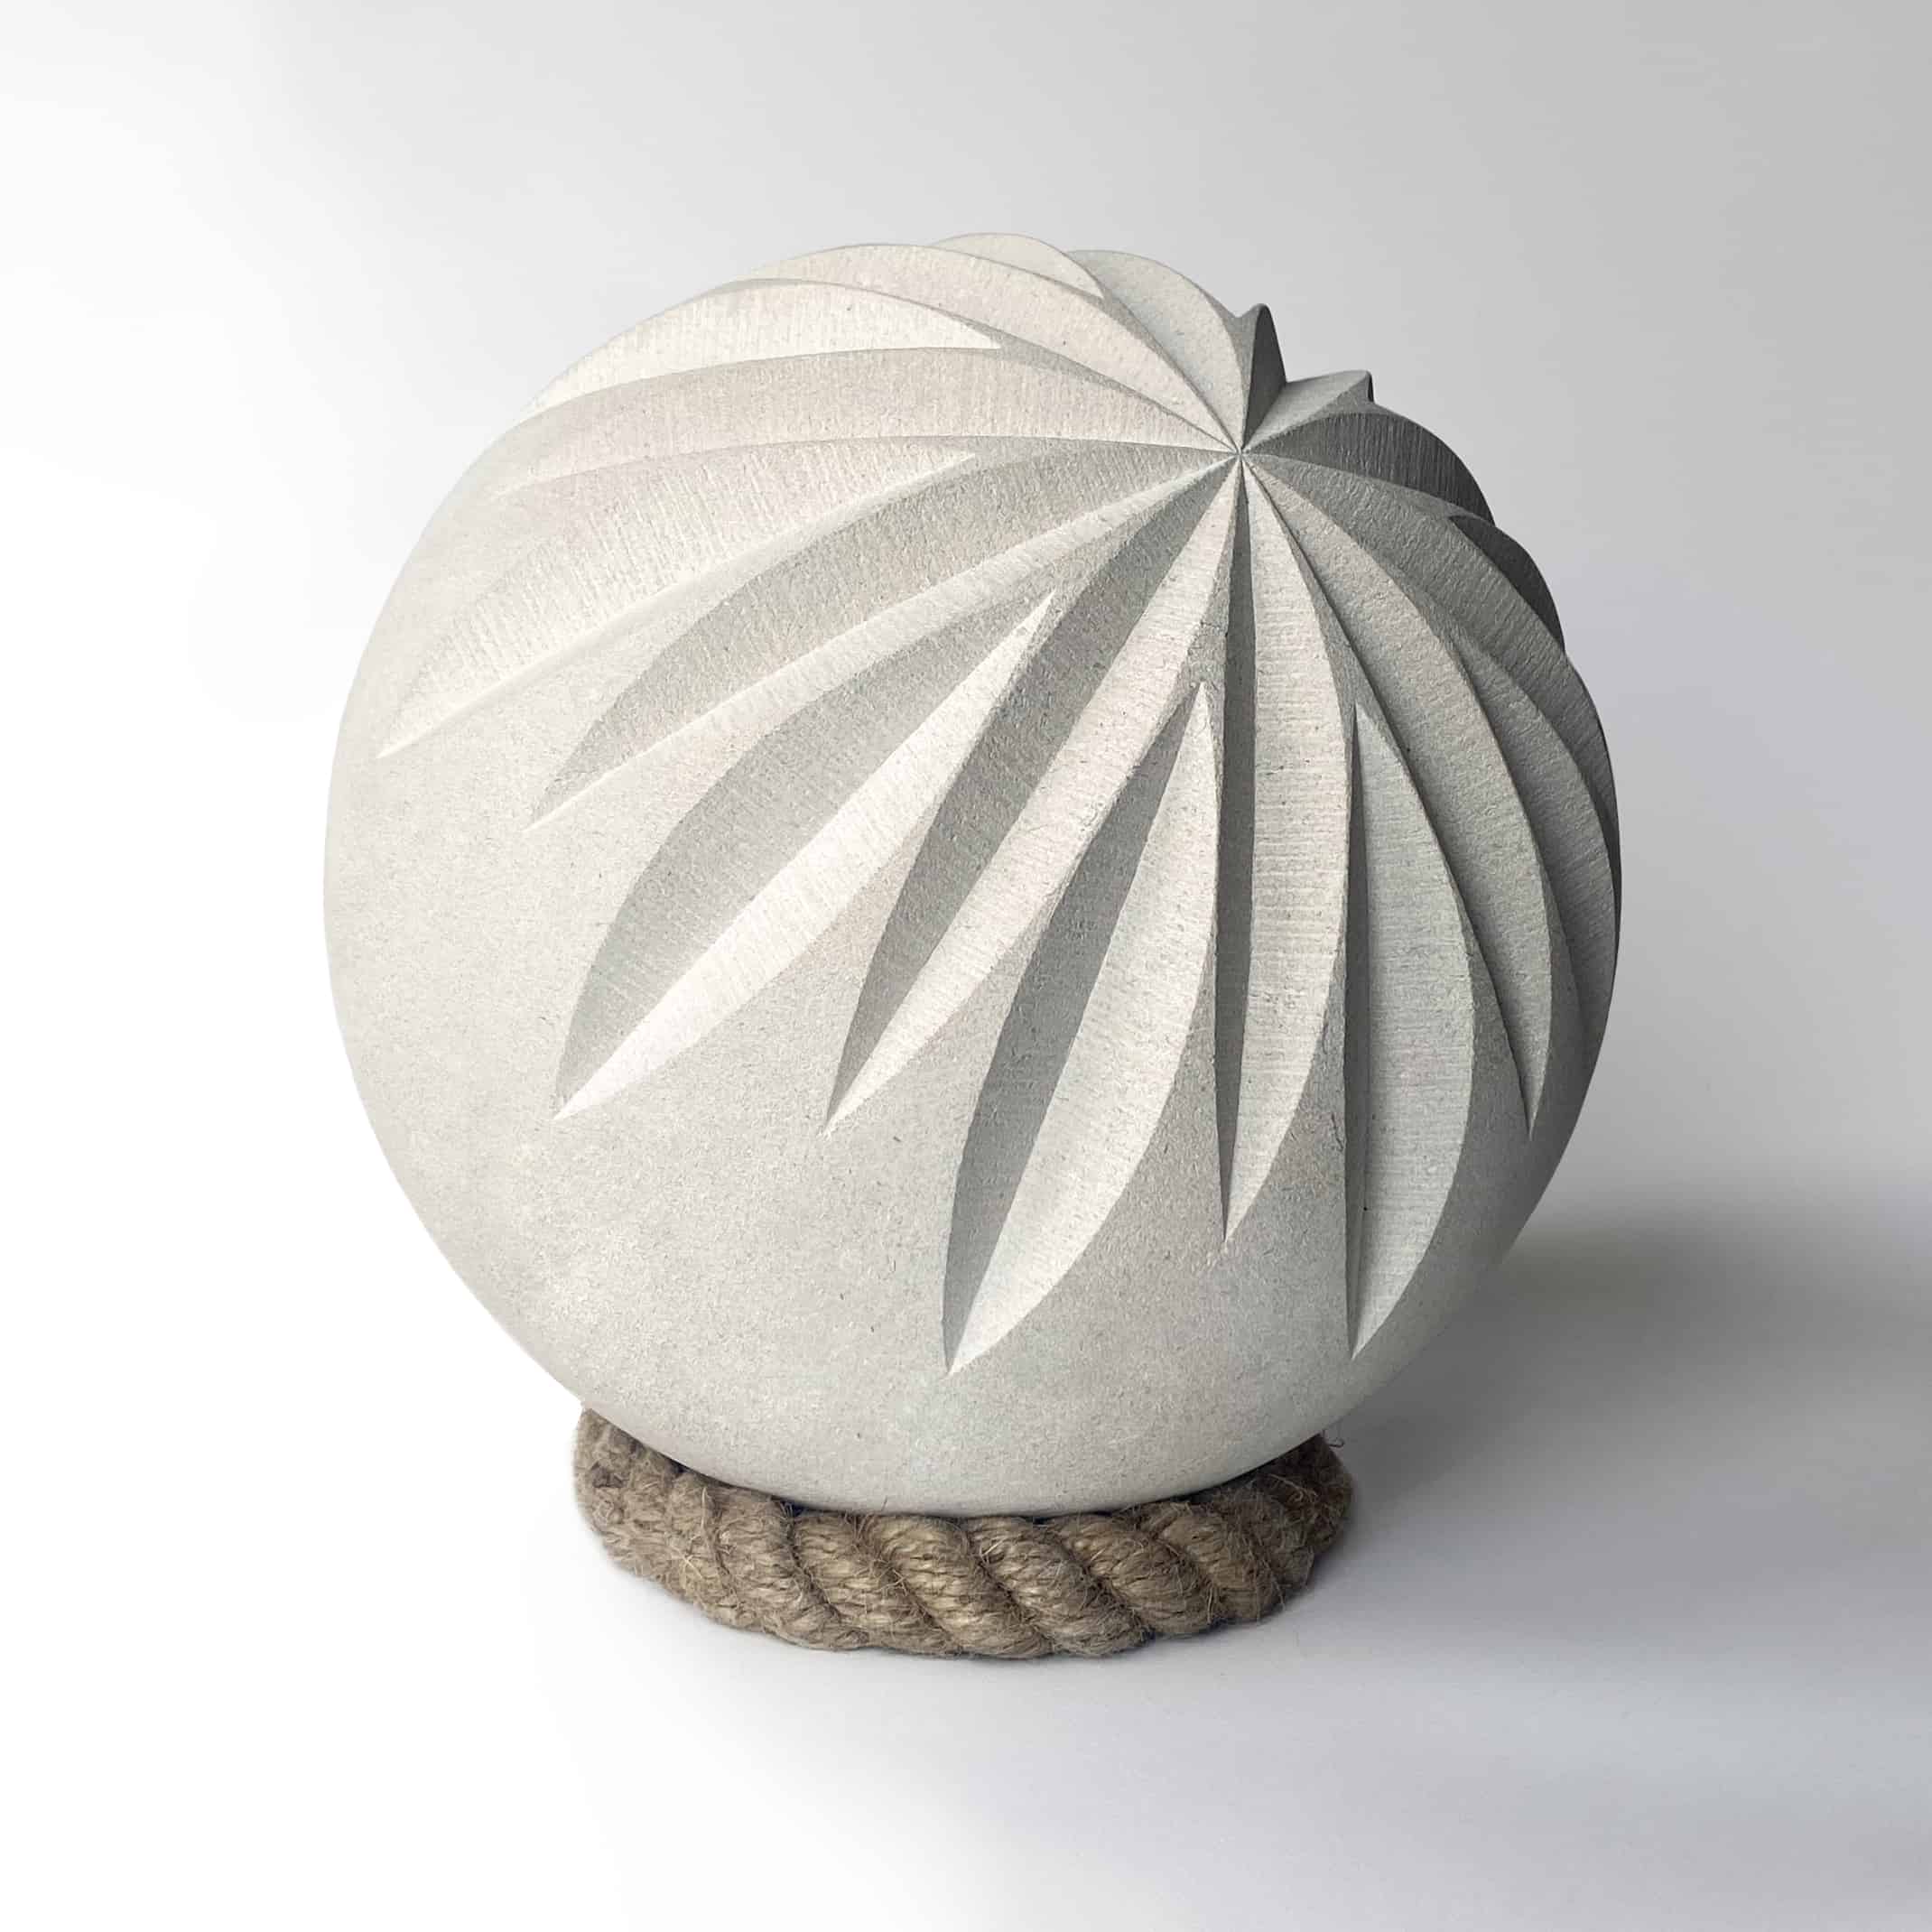 Buff coloured stone sphere with a geometric pattern carving into the stone